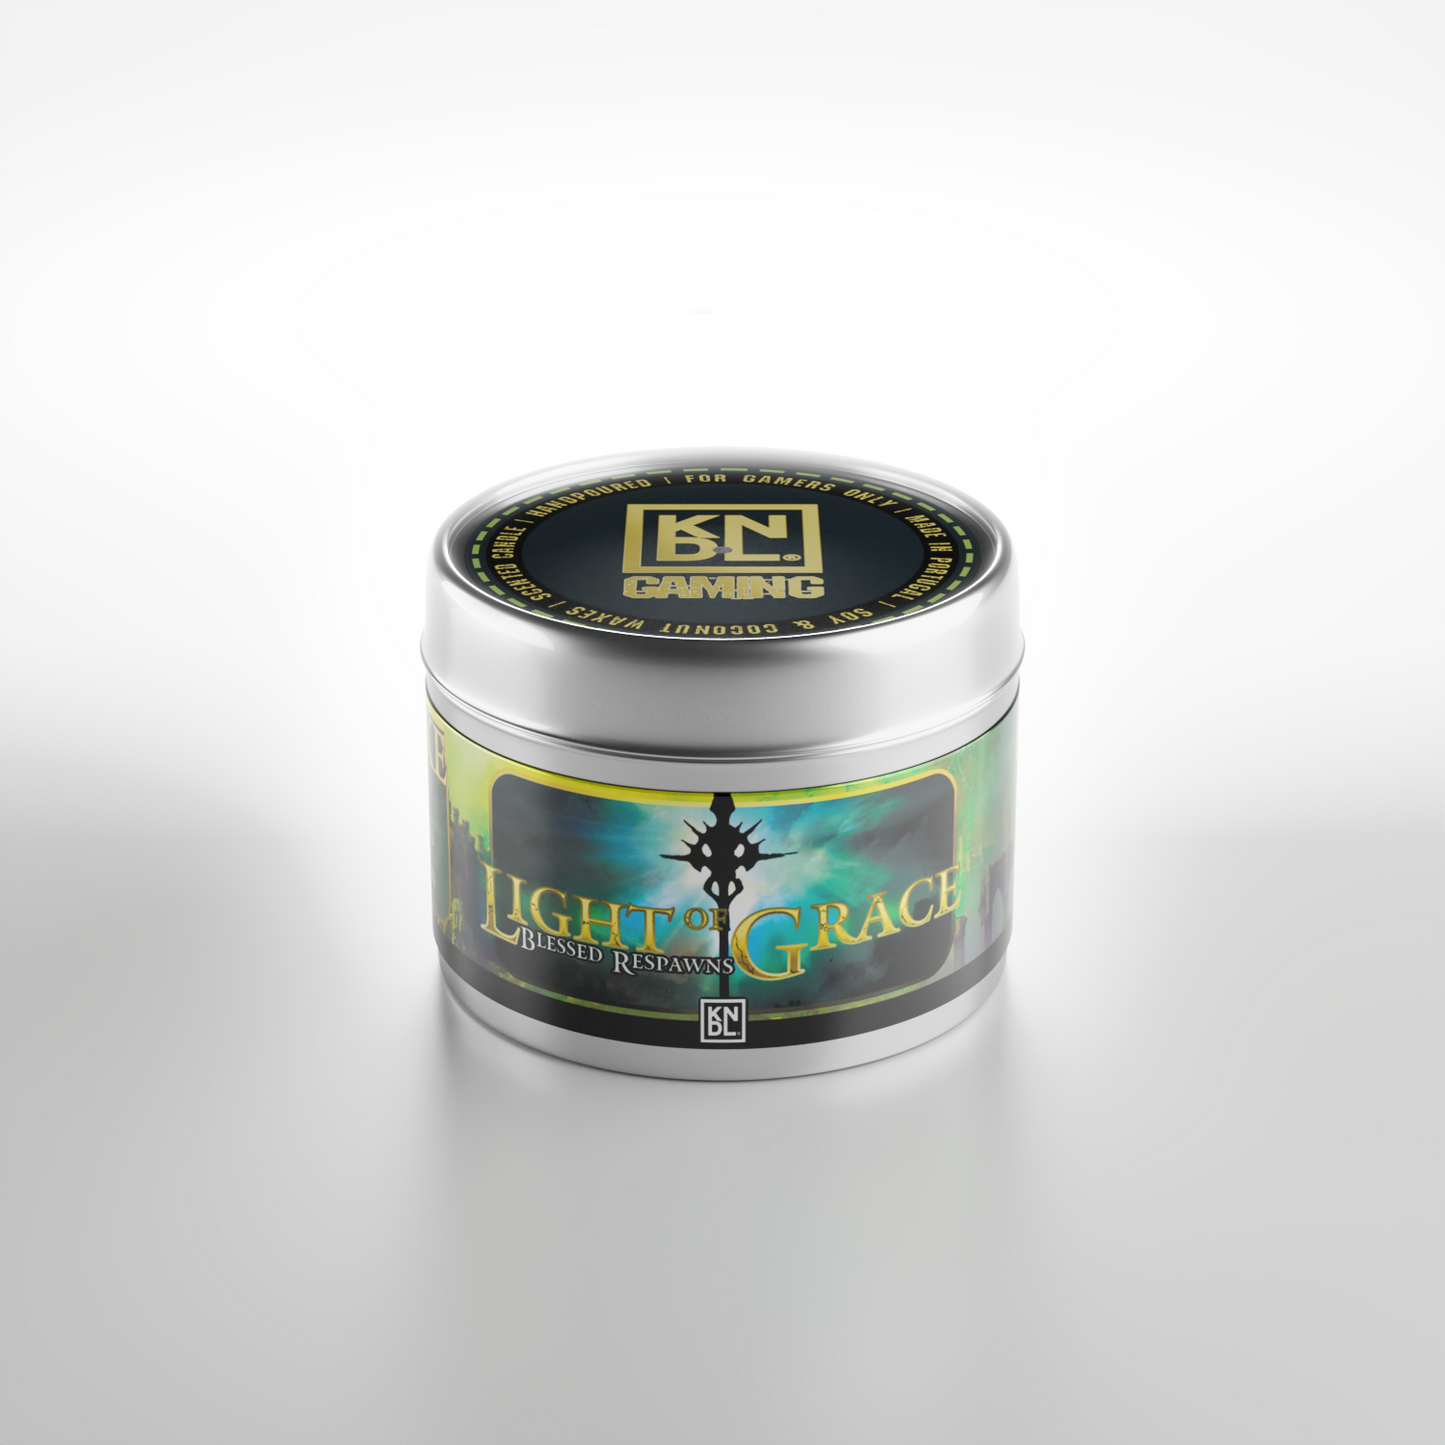 TIN NR 16 | LIGHT OF GRACE | ELDEN RING INSPIRED SCENTED CANDLE